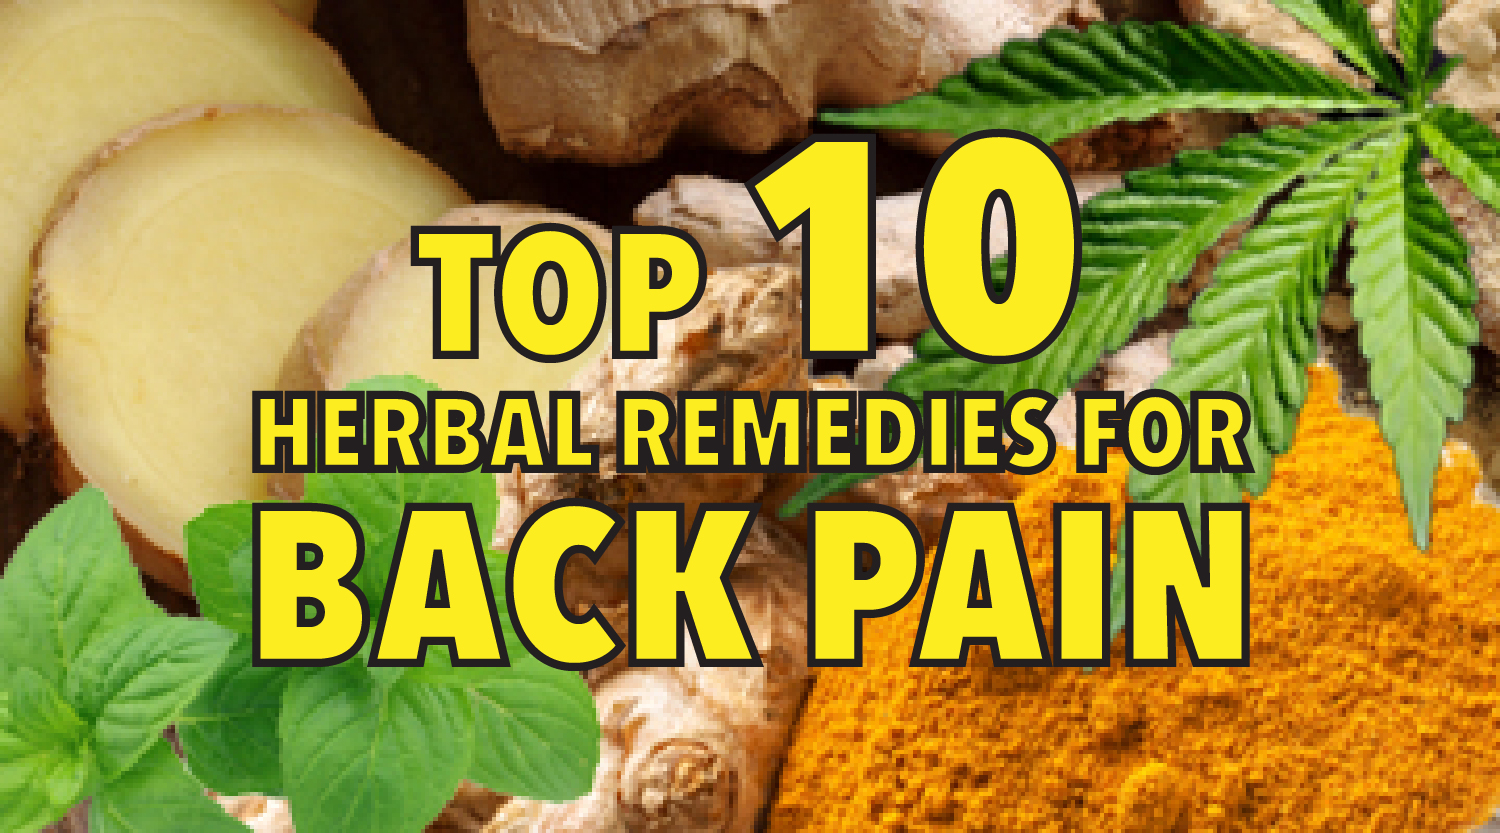 Top 10 herbal remedies for back pain